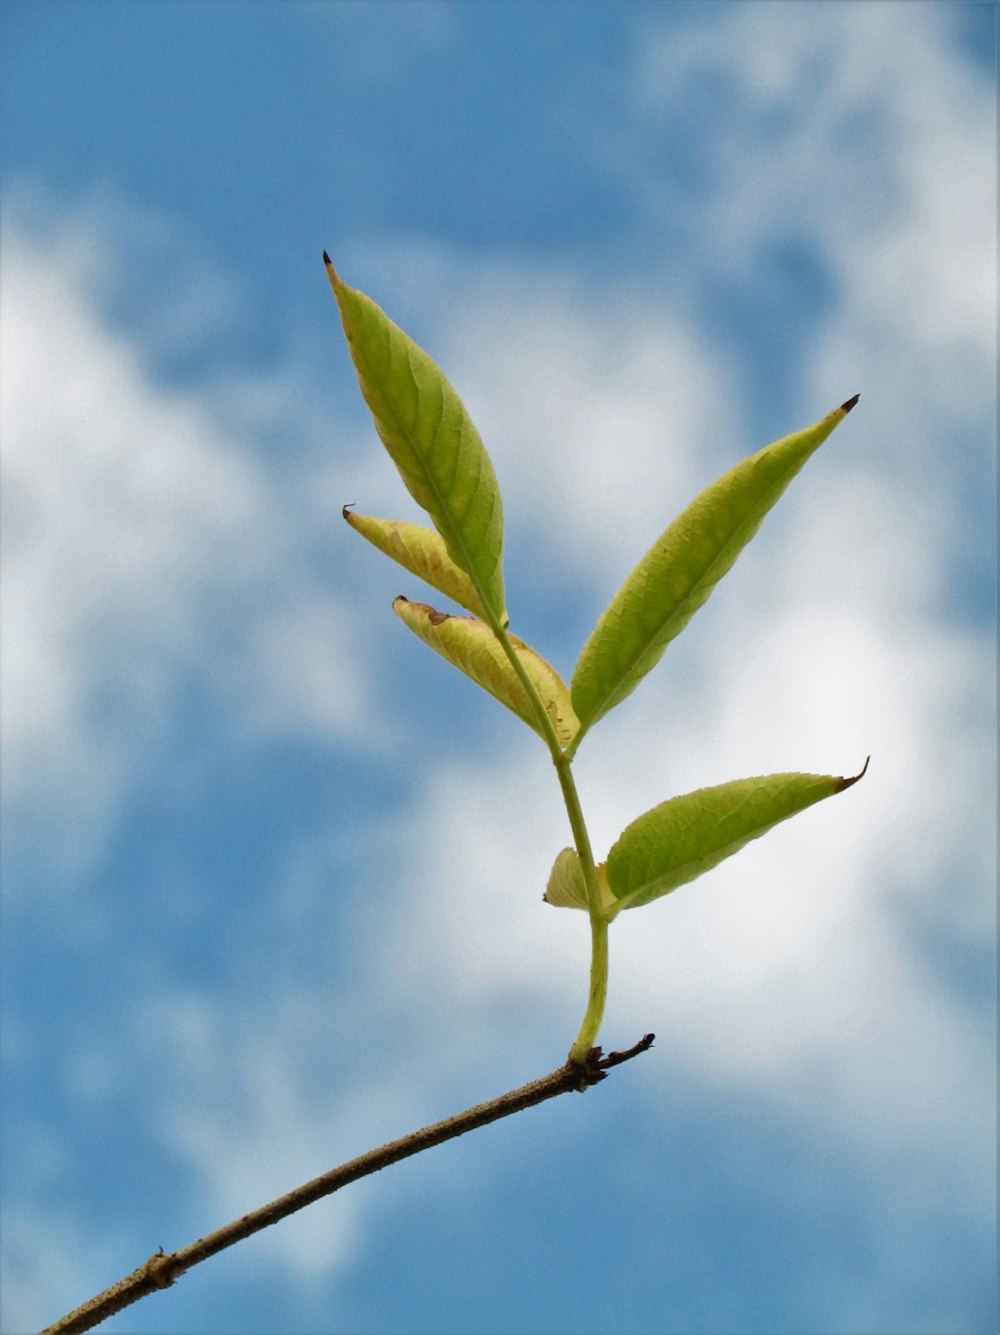 a branch with a green leaf against a blue sky with clouds